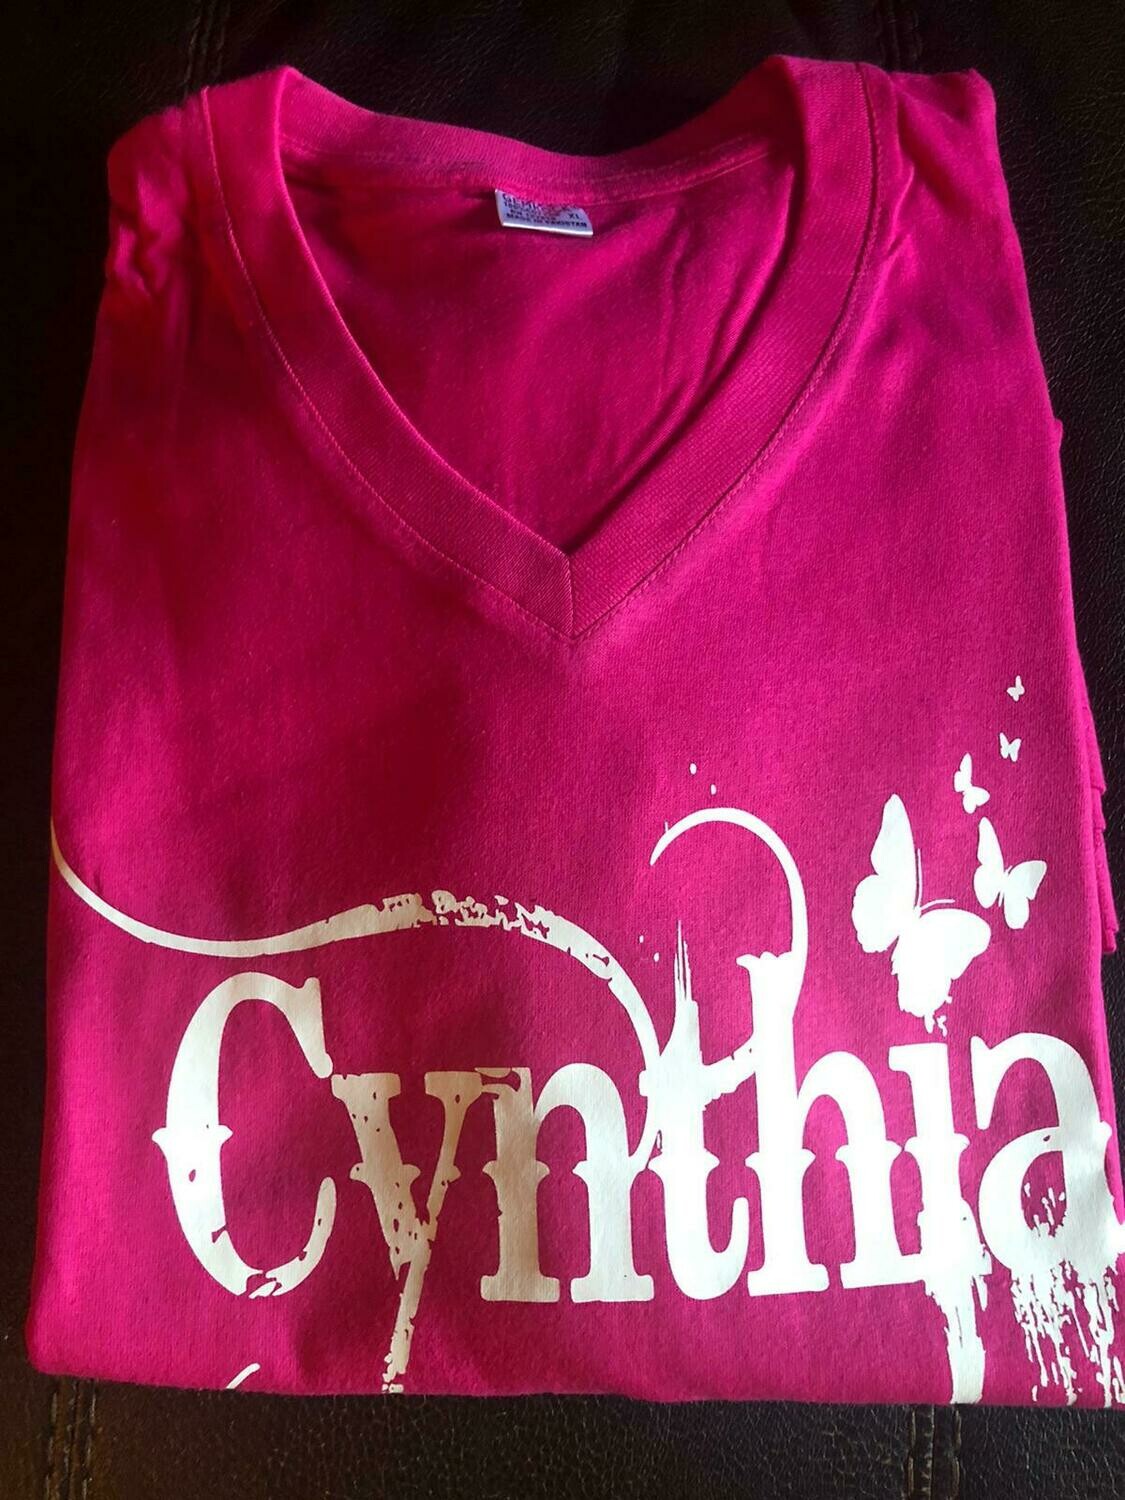 PINK V-NECK T-SHIRTS W/ WHITE LETTERS